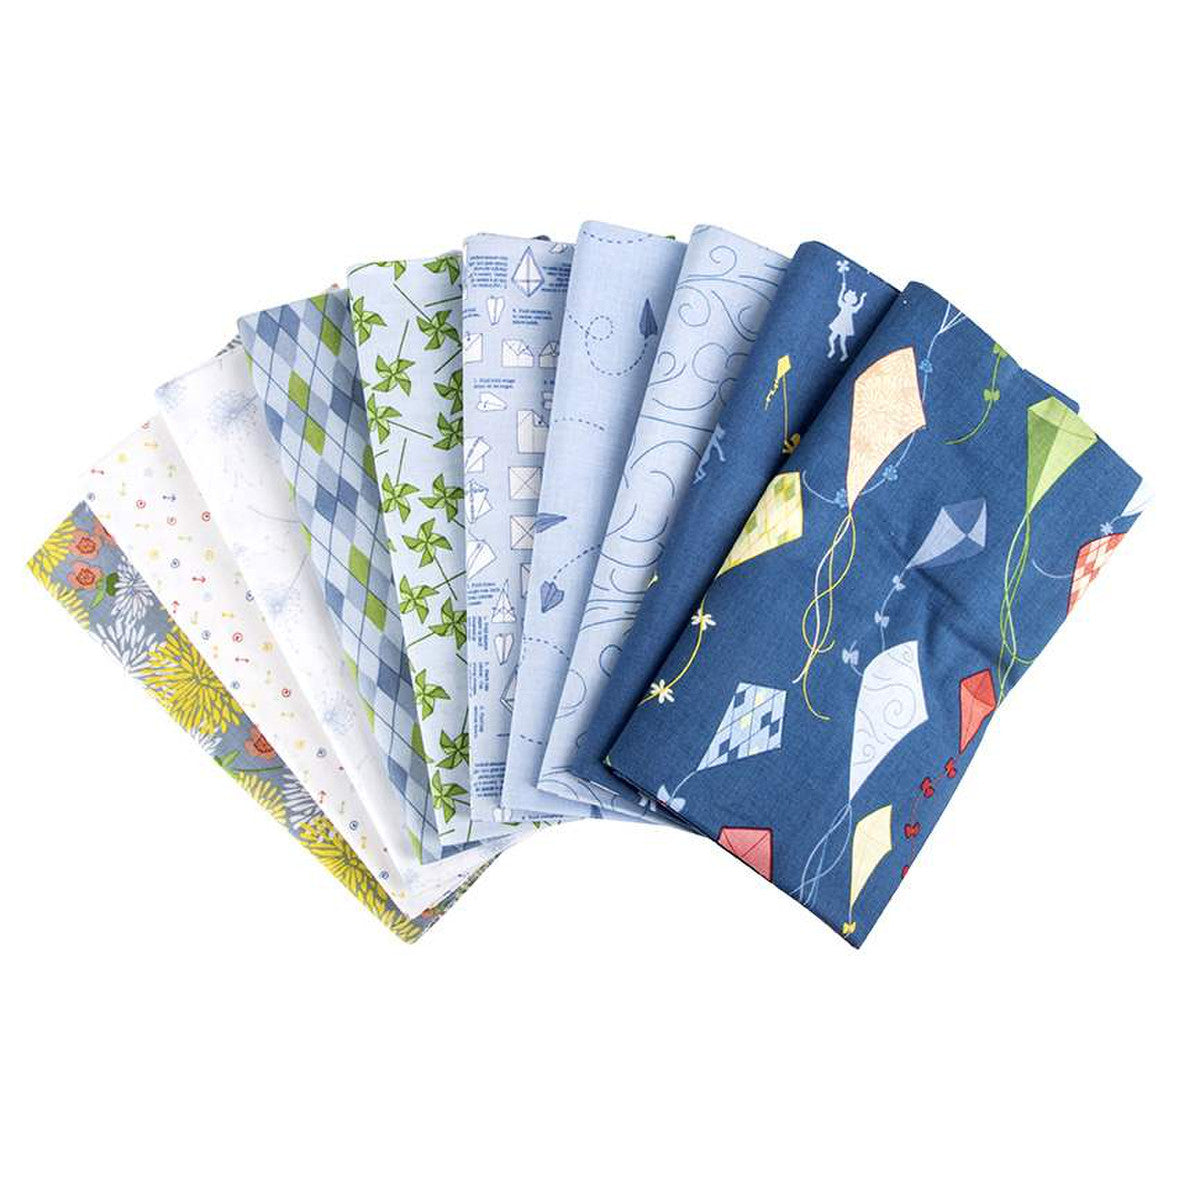 This 1-Yard precut bundle includes a 1-yard piece of each print in the blue colorway (C11850-BLUE, C11851-DENIM, C11852-SKY, C11853-SKY, C11854-SKY, C11855-SKY, C11856-SKY, C11857-WHITE, C11858-SKY, C11859-MULTI) from the On the Wind collection by Jill Finley of Jillily Studio for Riley Blake Designs for a total of 10 yards.  100% cotton  Width: 43"/44"